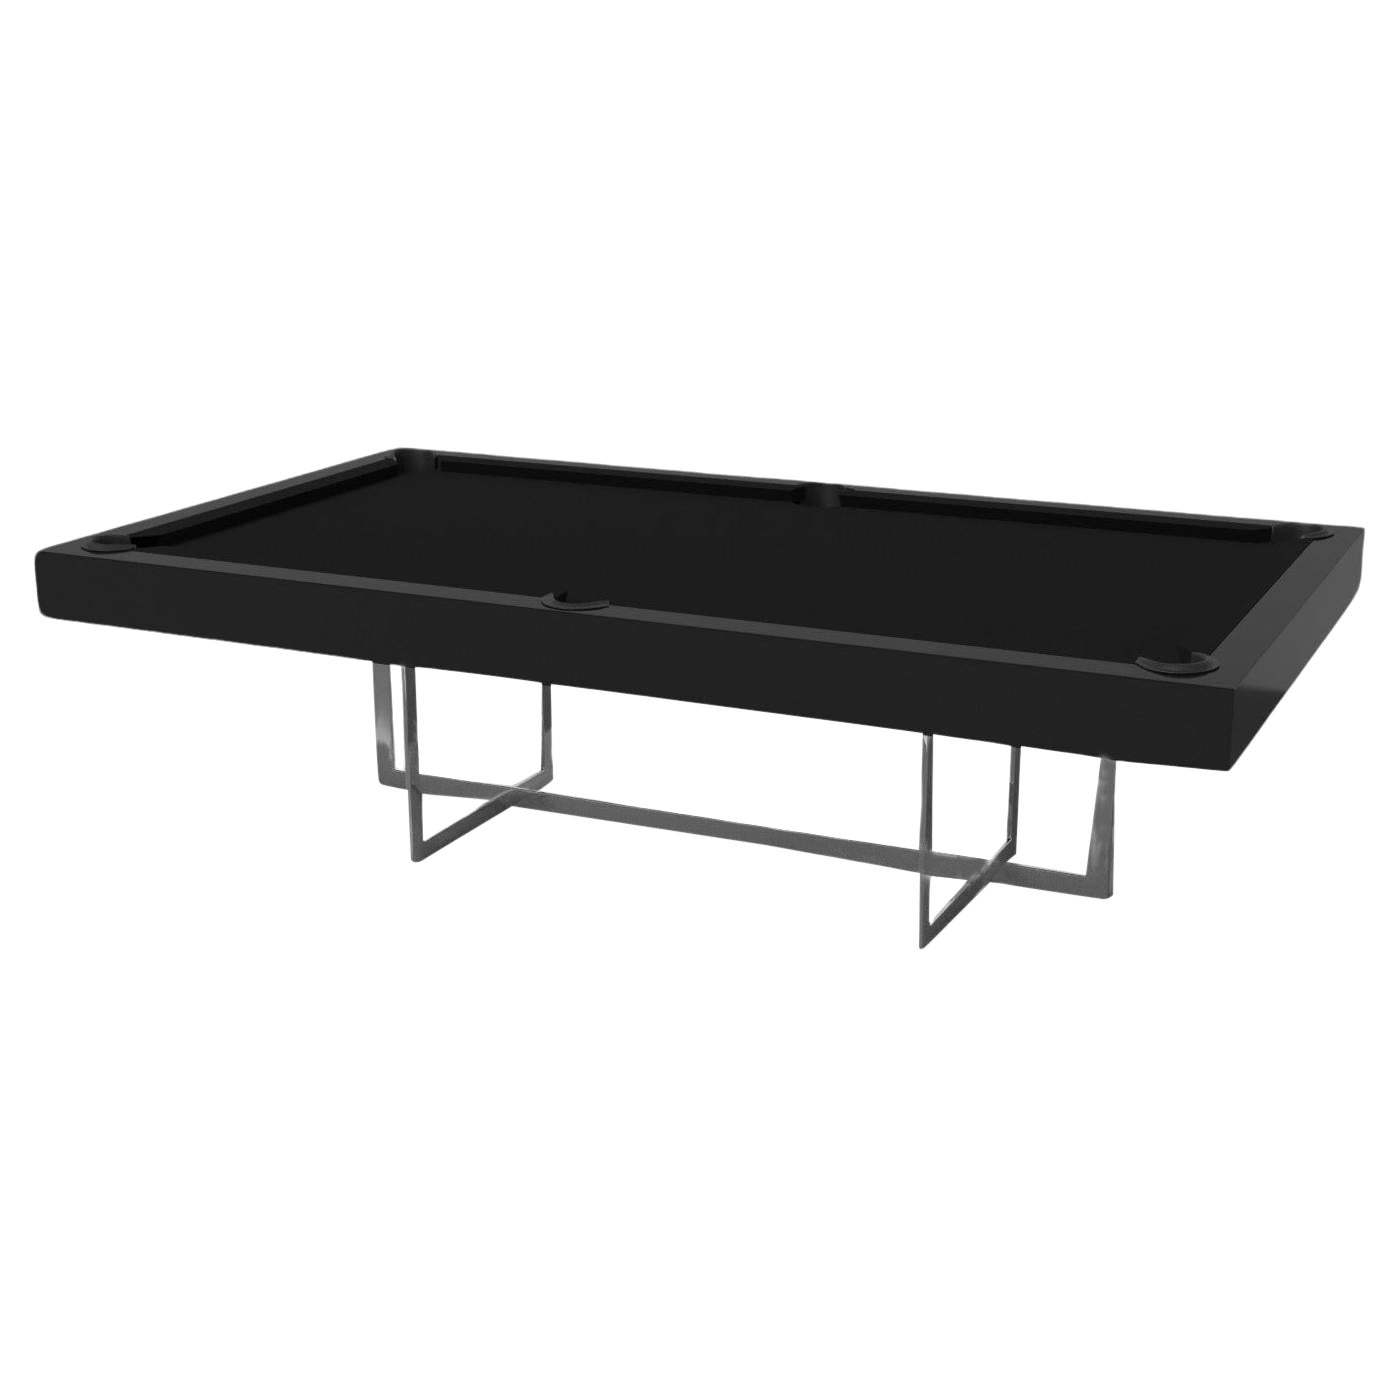 Elevate Customs Beso Pool Table / Solid Pantone Black Color in 9' - Made in USA For Sale